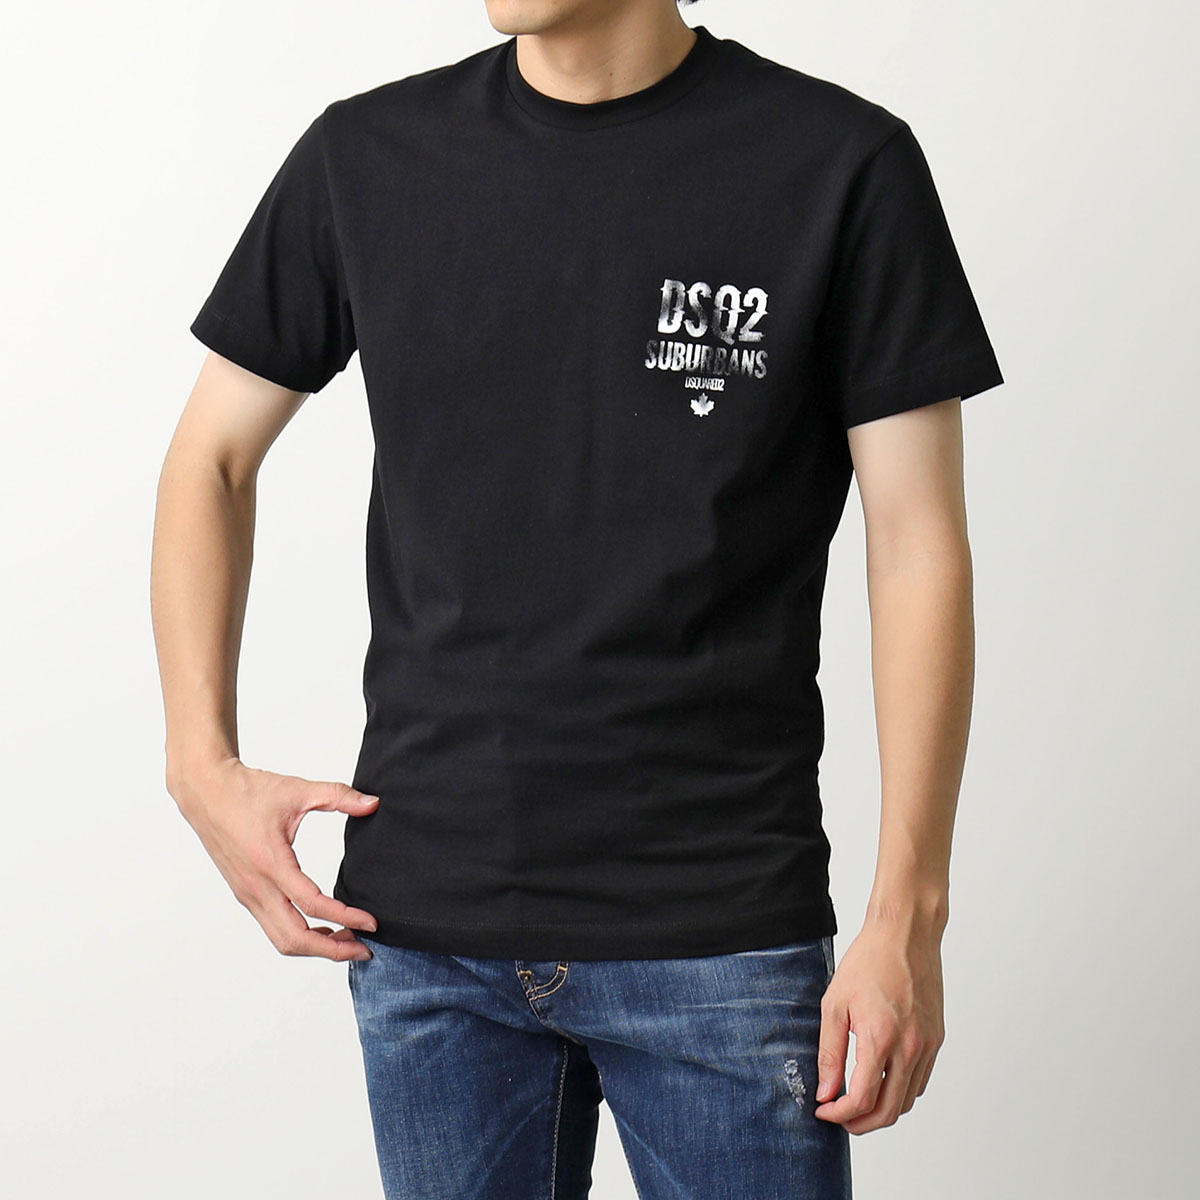 DSQUARED2 ディースクエアード Tシャツ COOL FIT T S74GD1259 D20014 メンズ 半袖 カットソー コットン  クルーネック ロゴT カラー2色